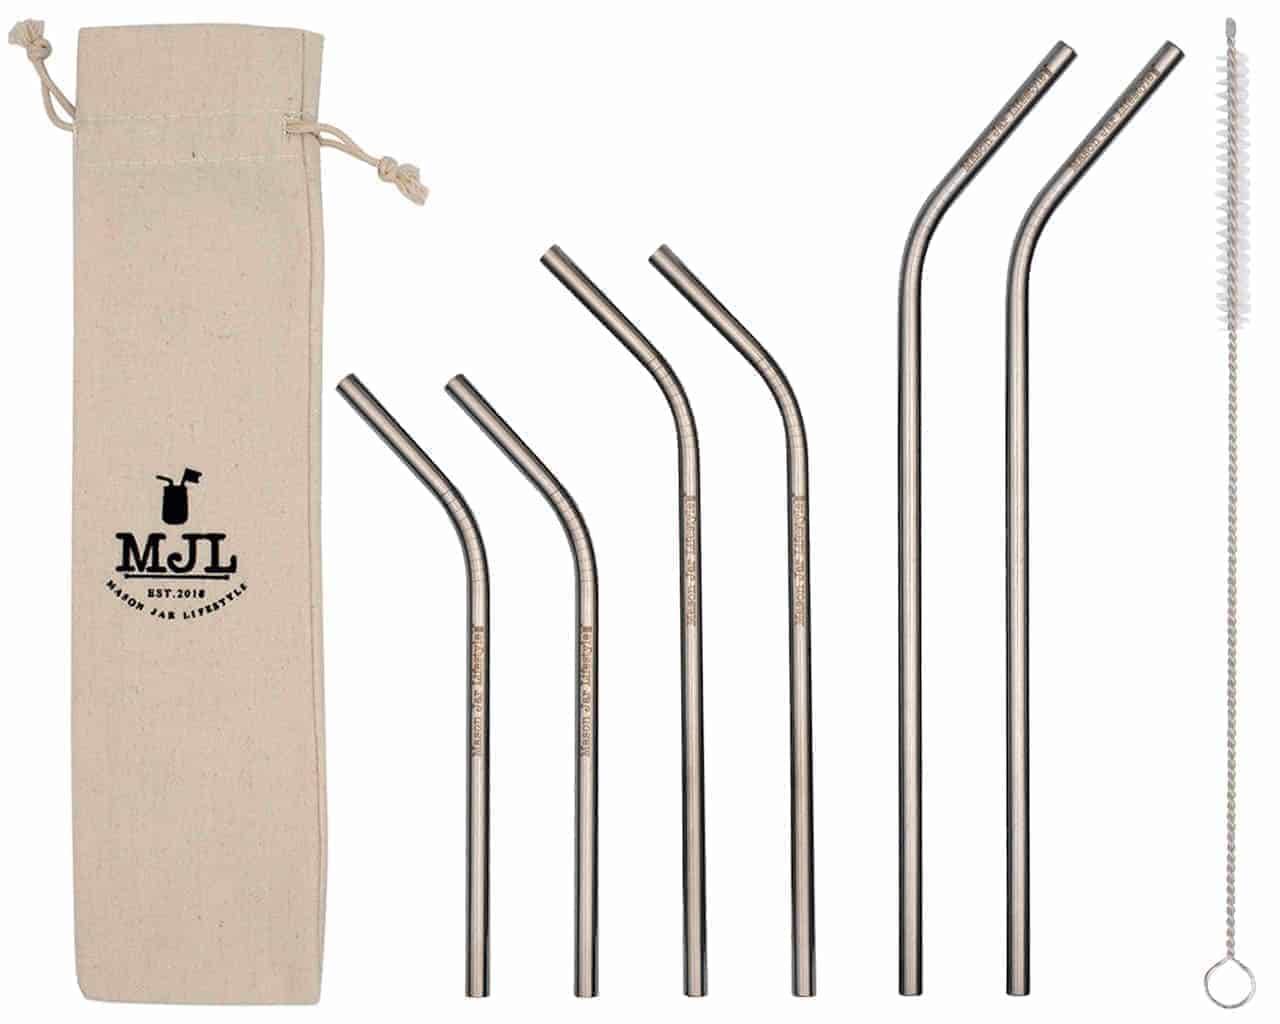 Mason Jar Lifestyle Combination pack thin bent stainless steel metal straws for Mason jars and other cups and glasses